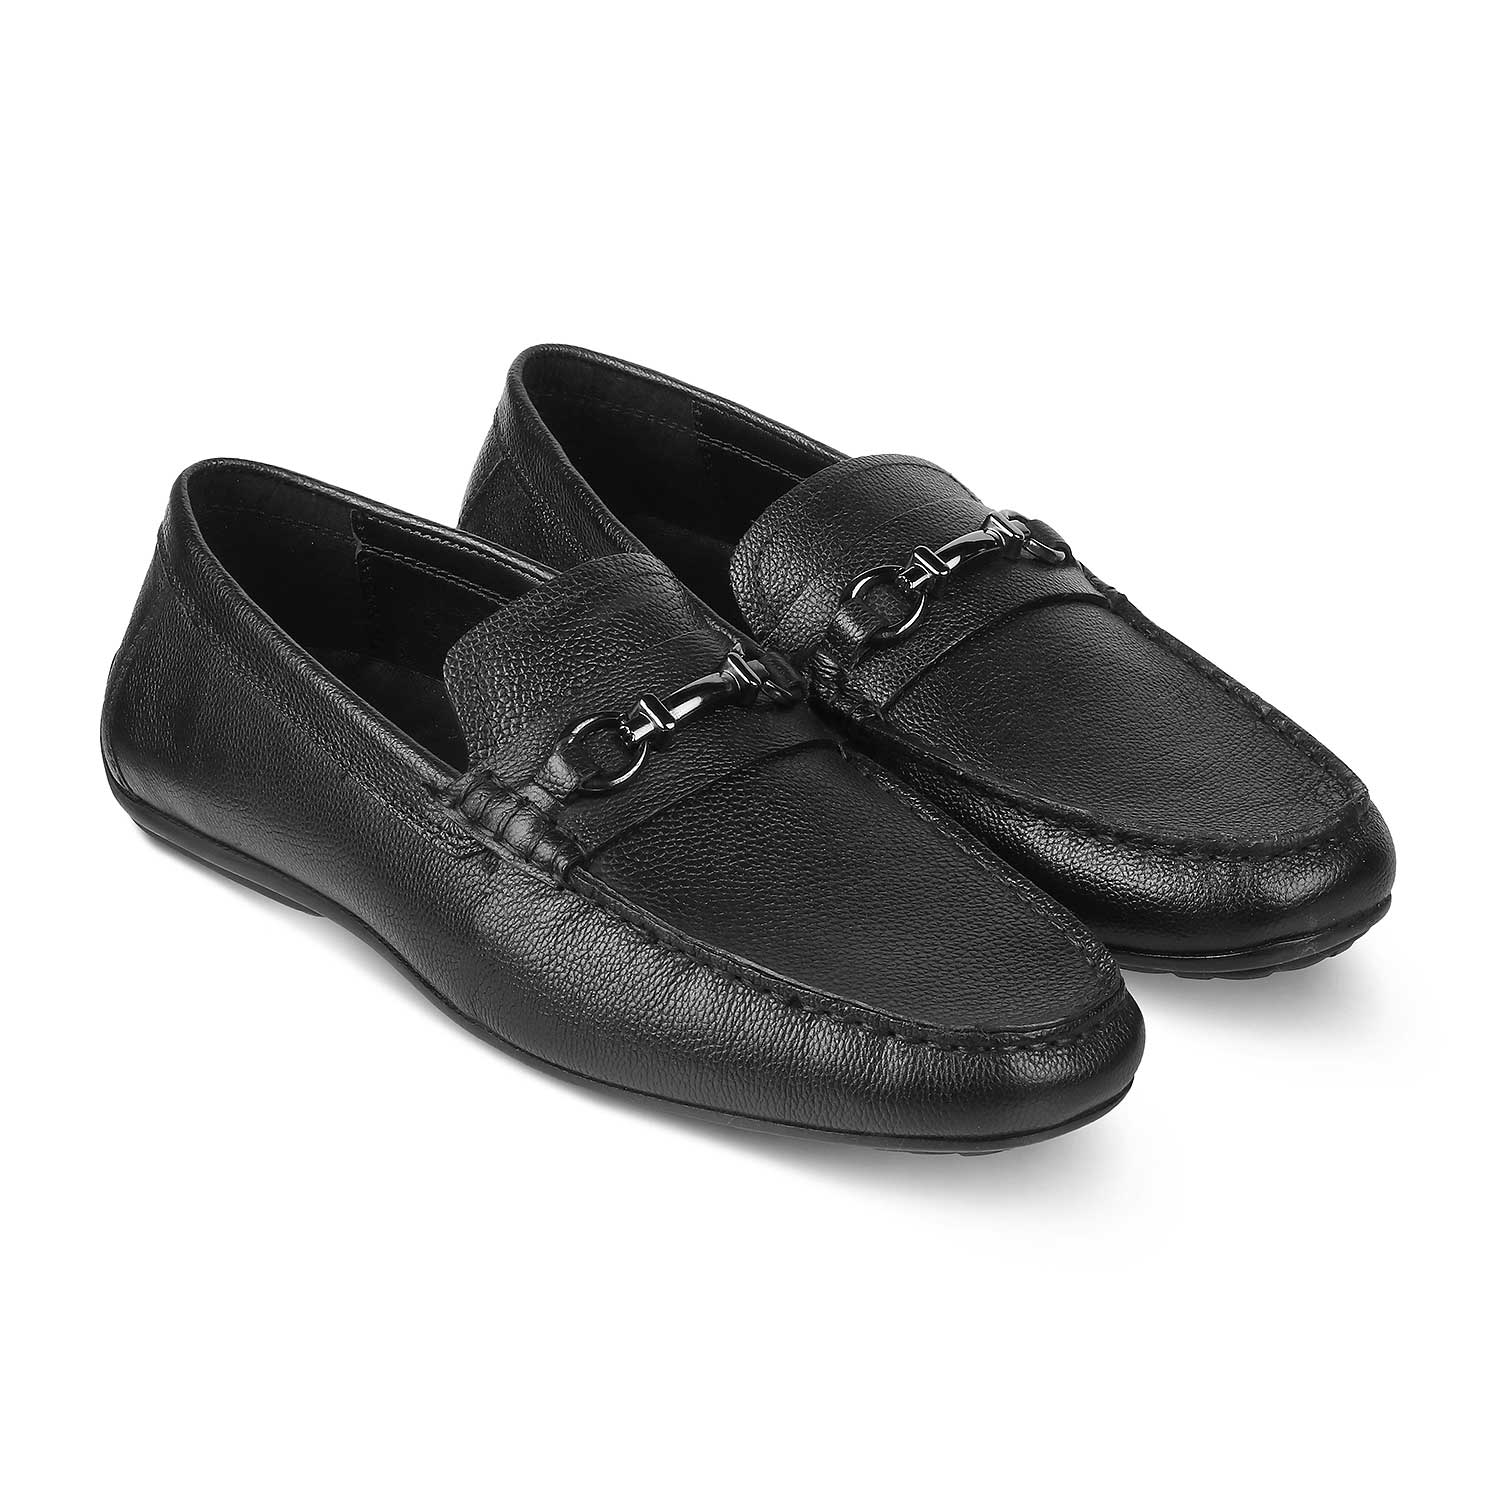 The Sandee Black Men's Leather Driving Loafers Tresmode - Tresmode